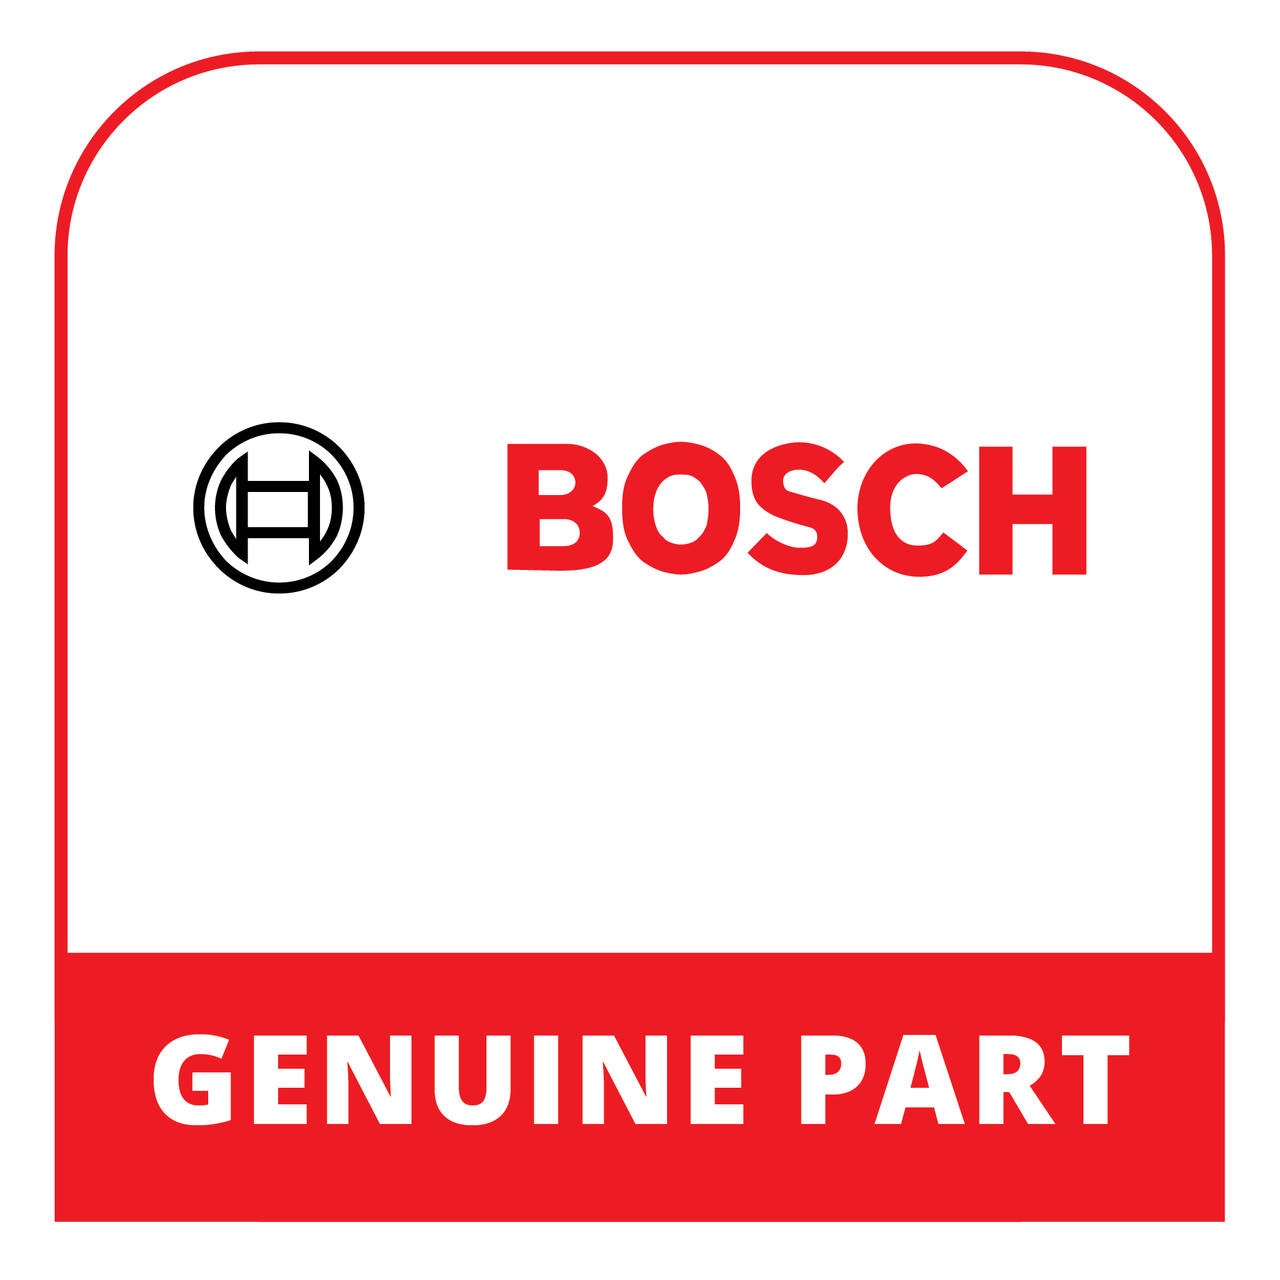 Bosch (Thermador) 11050013 - Panel - Genuine Bosch (Thermador) Part